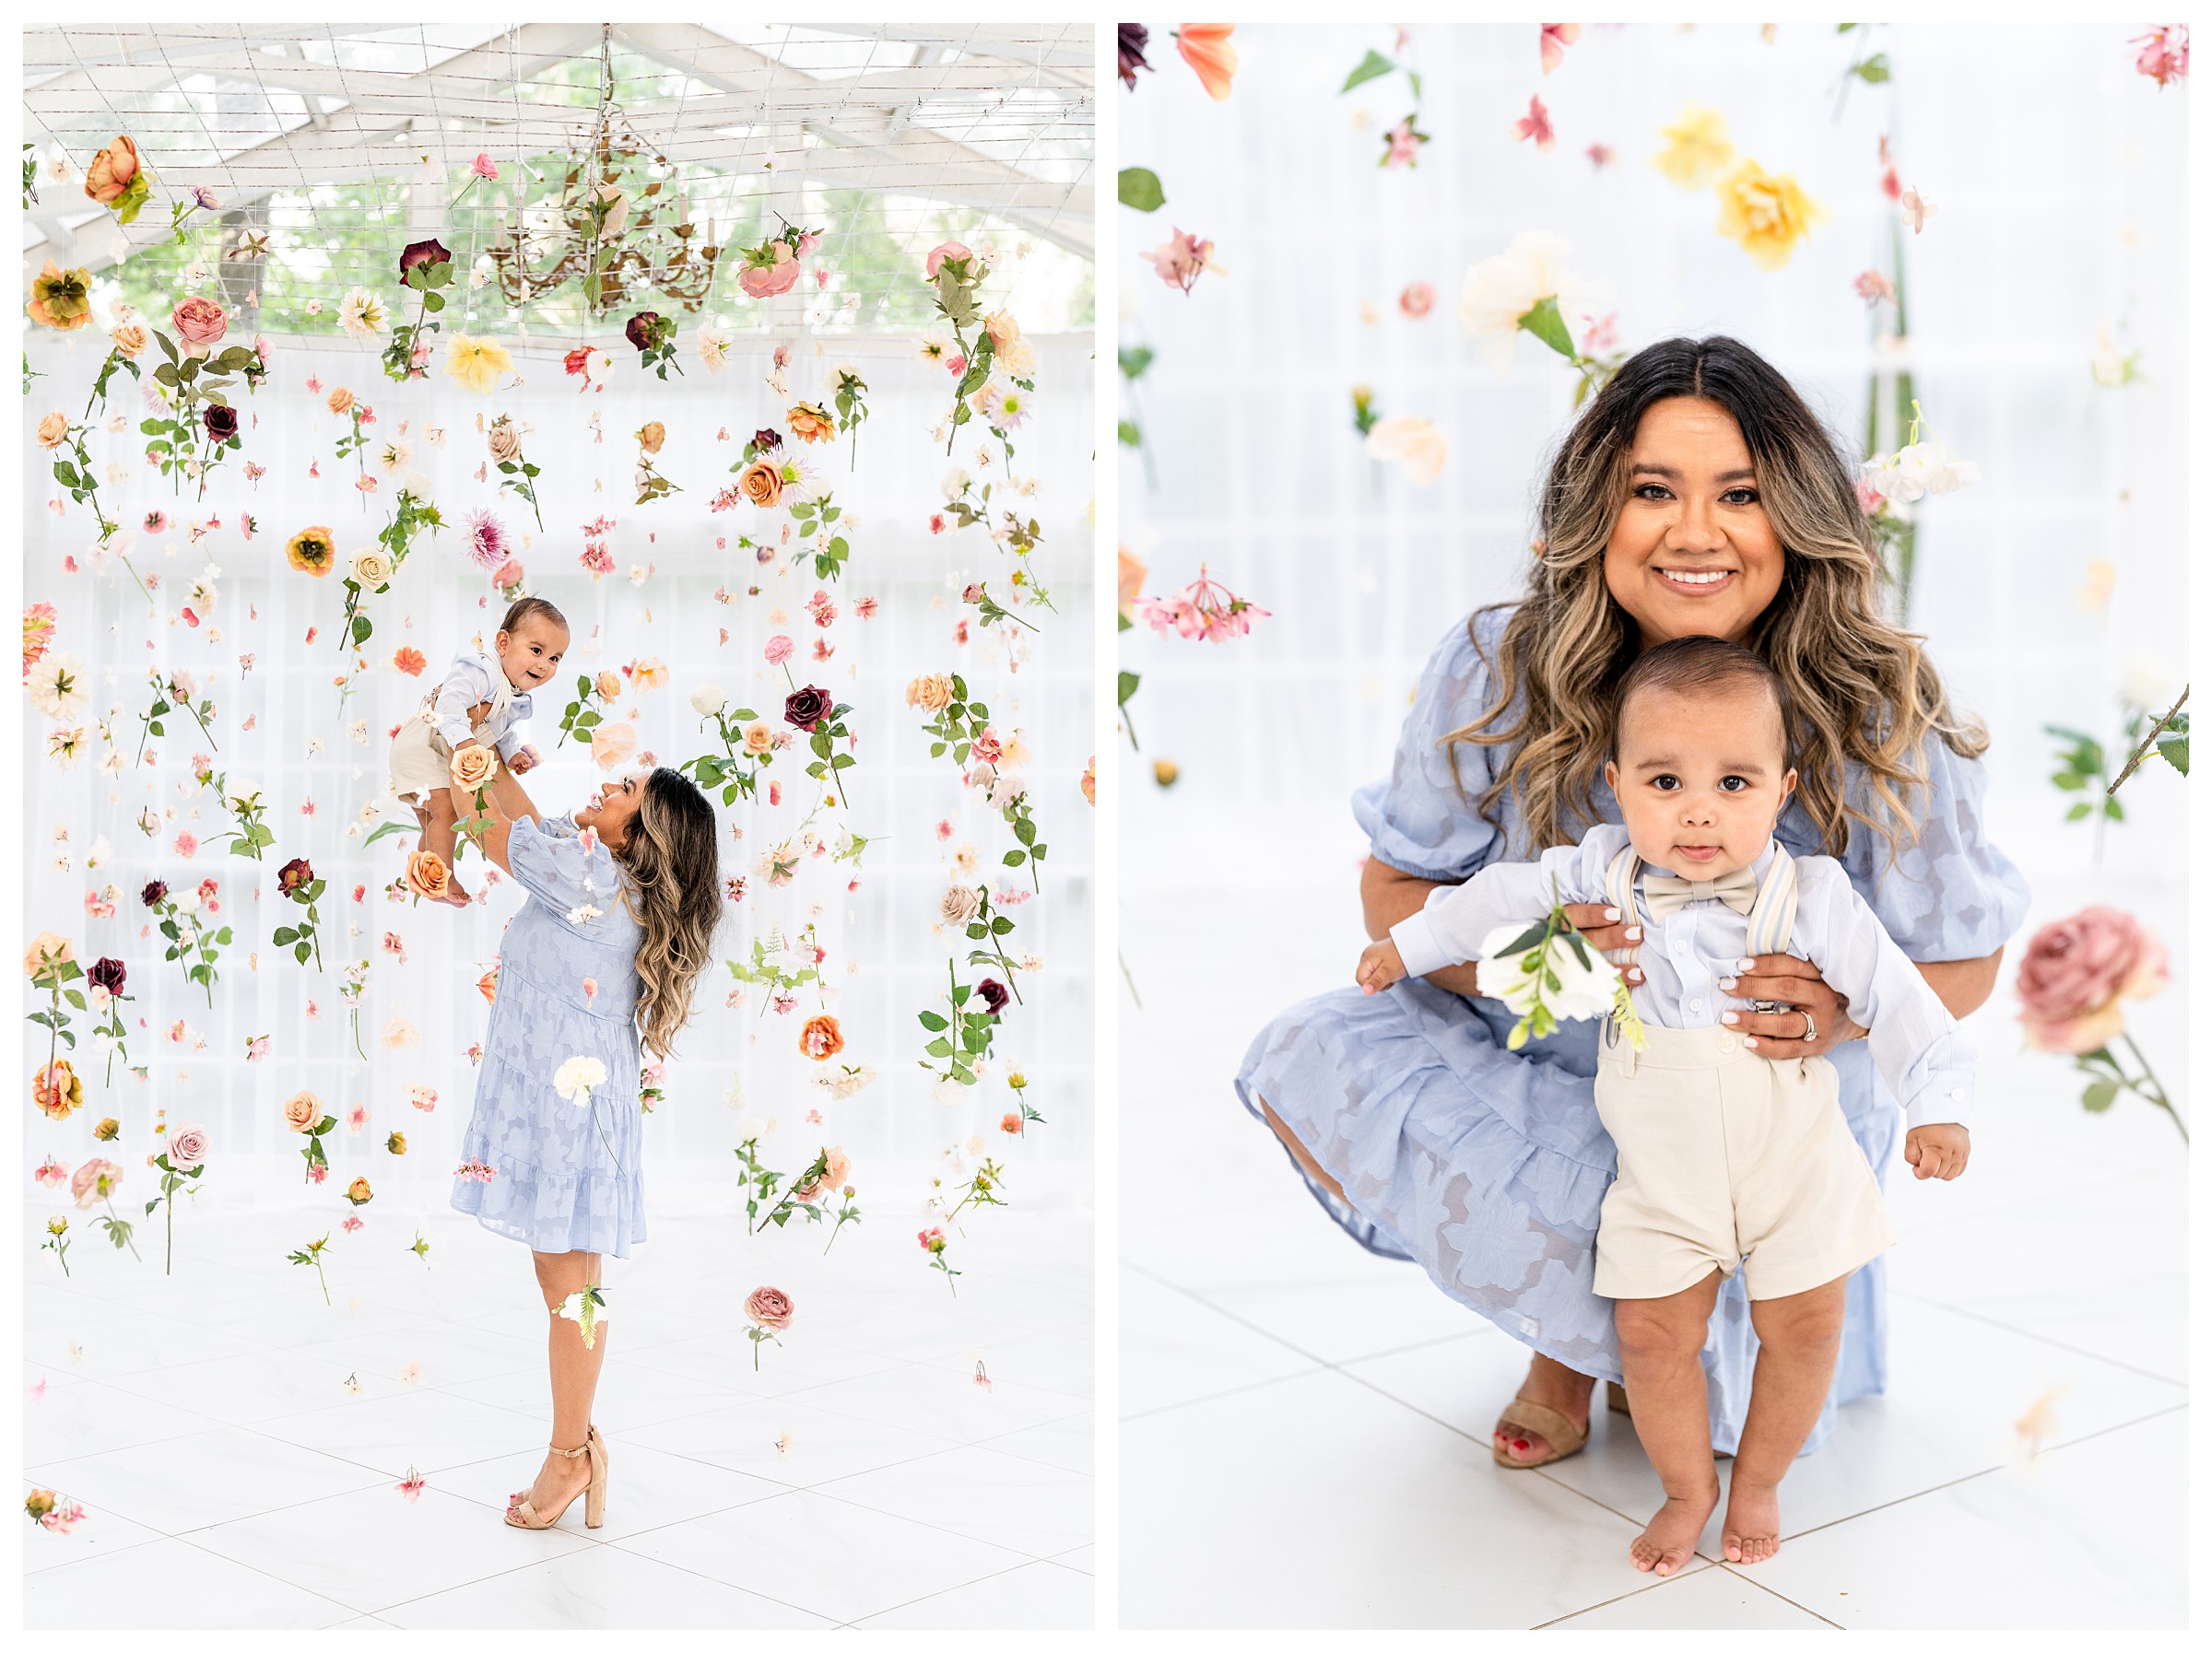 First image is mom holding her son up in the air while standing in a white greenhouse of hanging flowers at The Oak Atelier in Houston, Texas